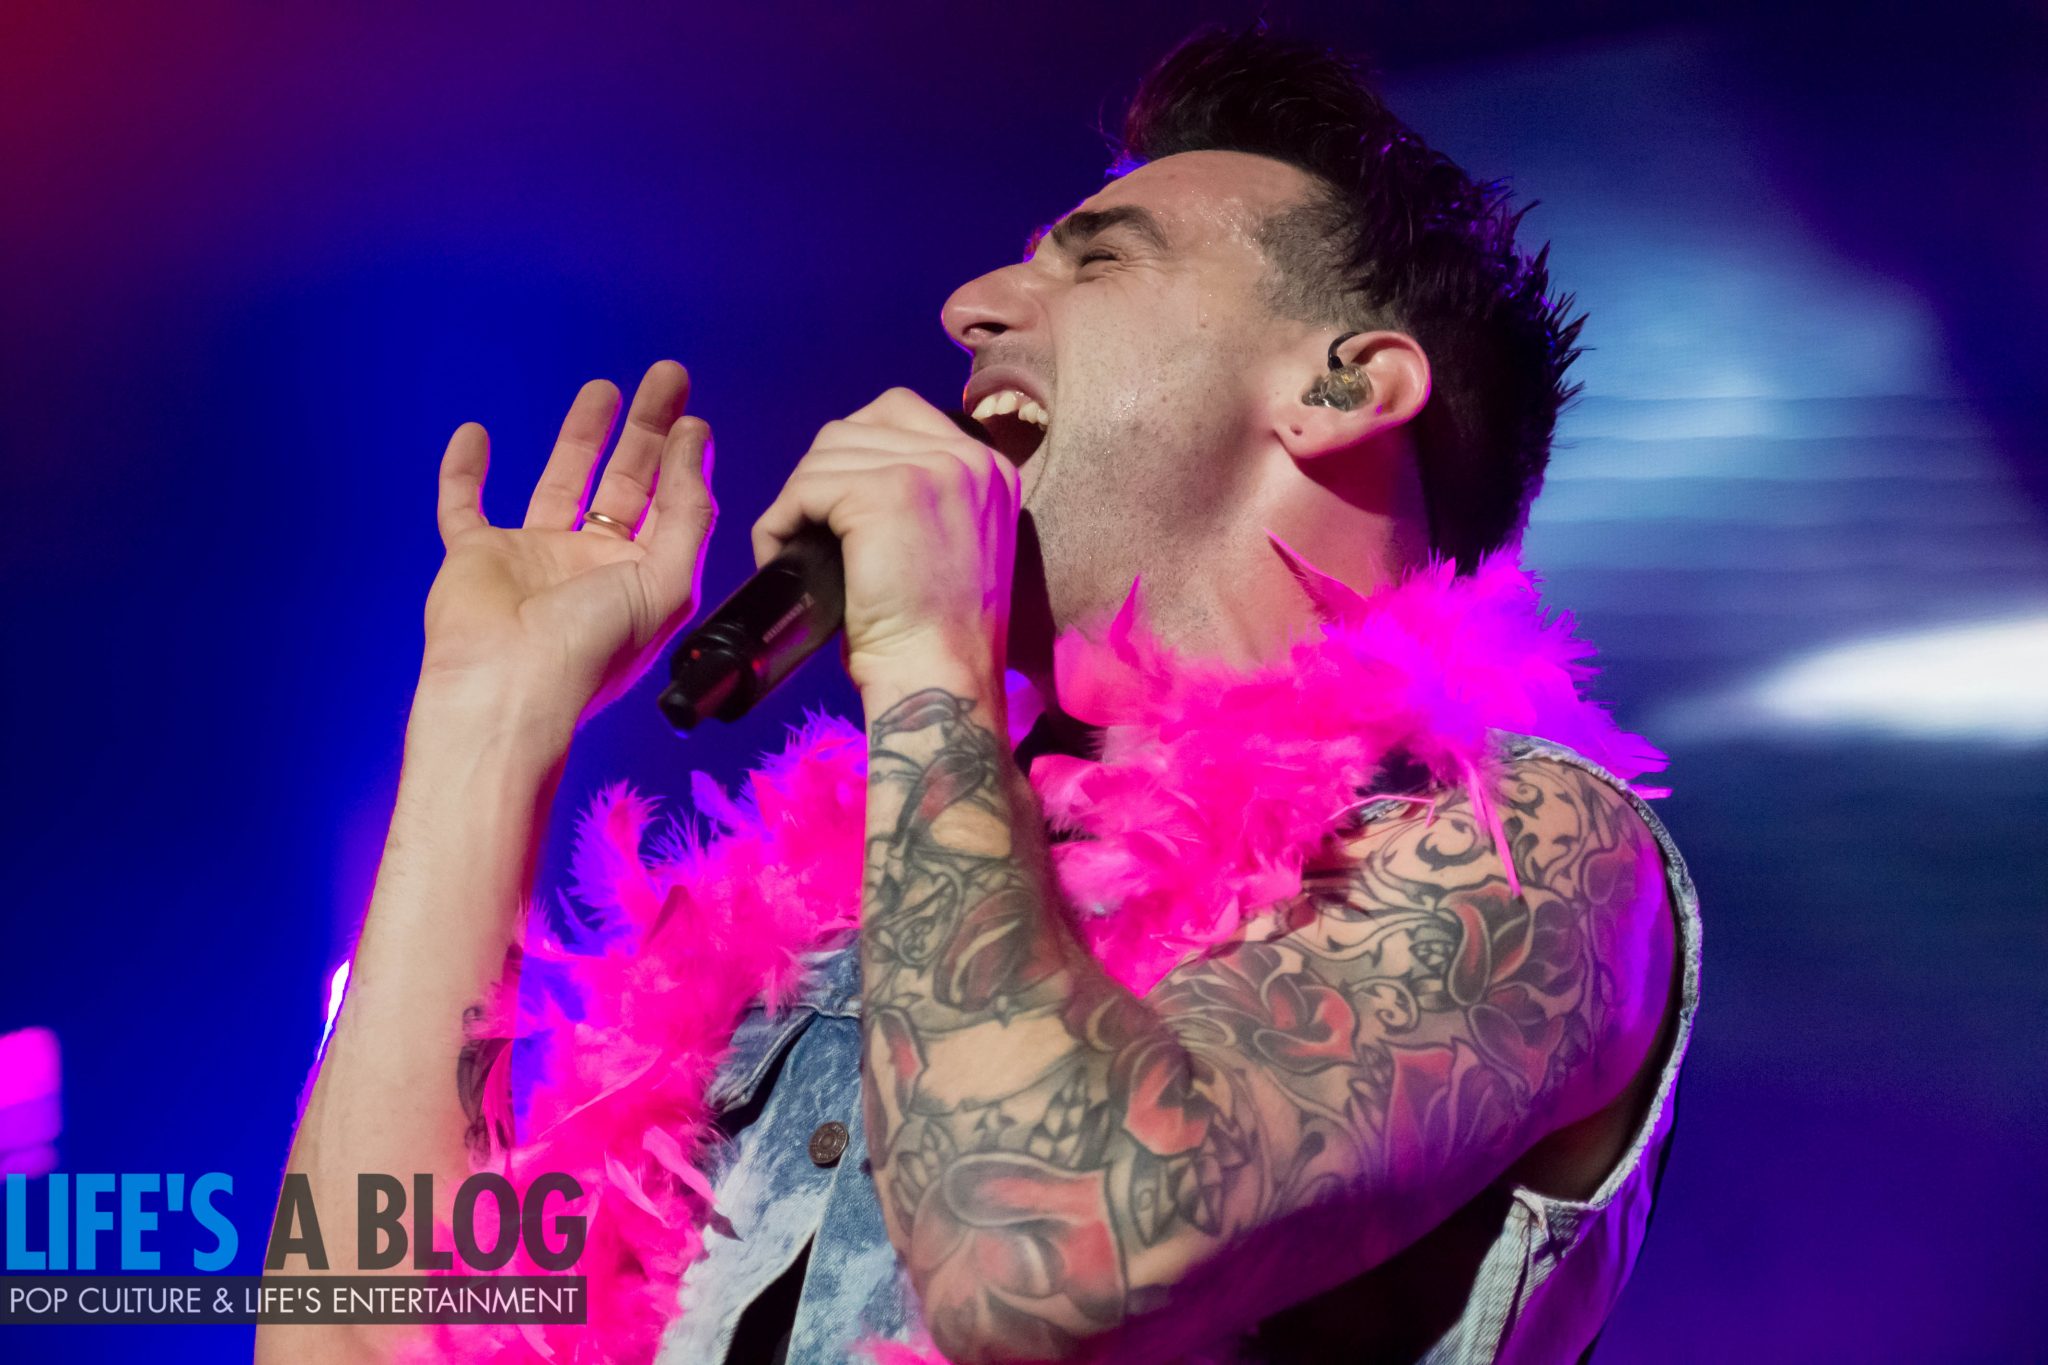 F*** that!  If You Can Do Anything, Check Out Hedley’s Wild Live Tour